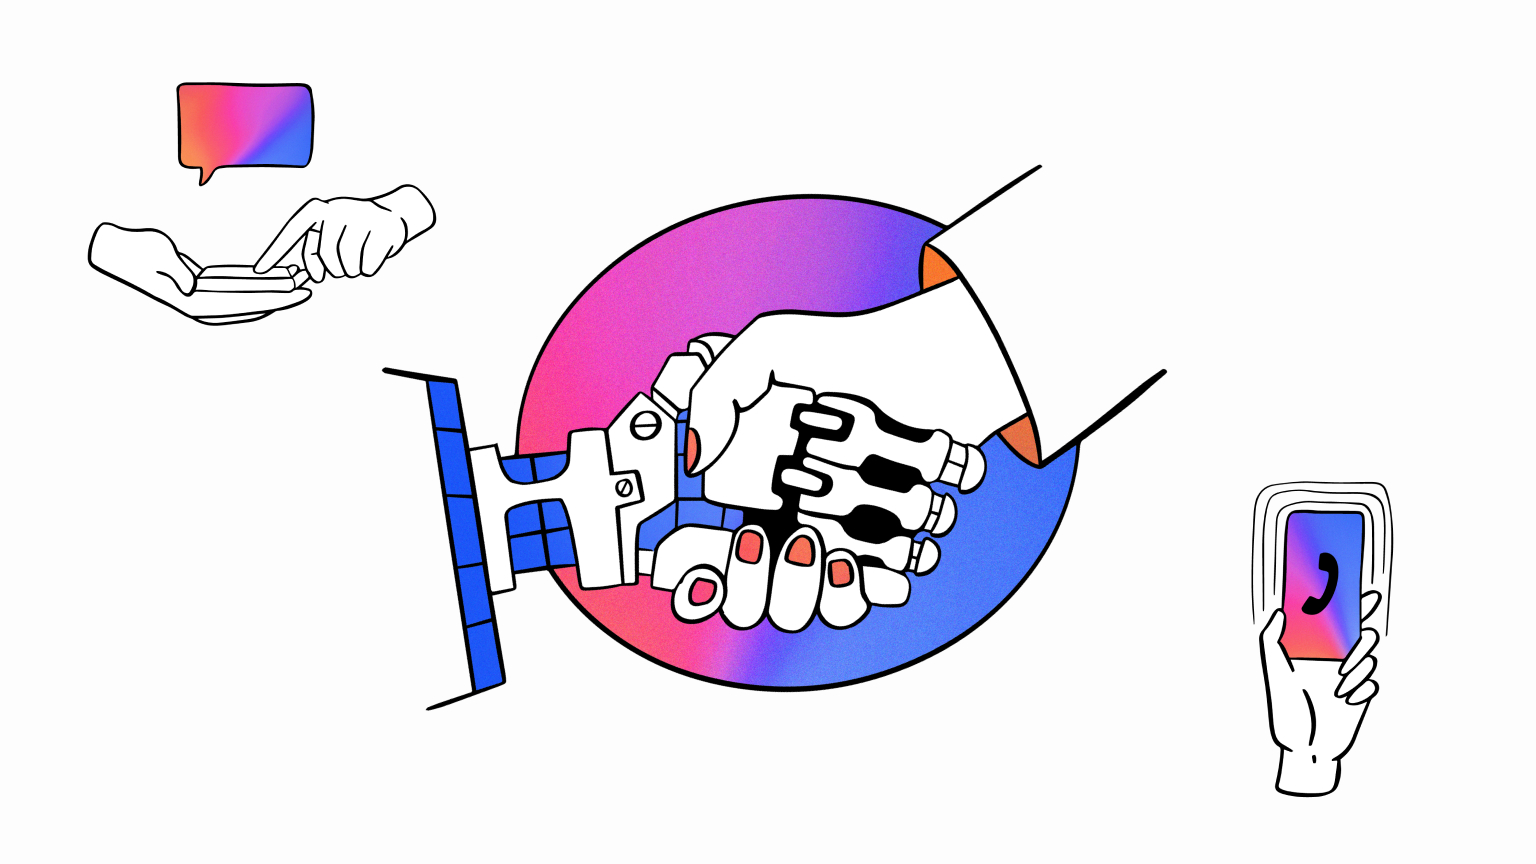 illustration of robot + human hand shaking, symbolizing a connected customer experience